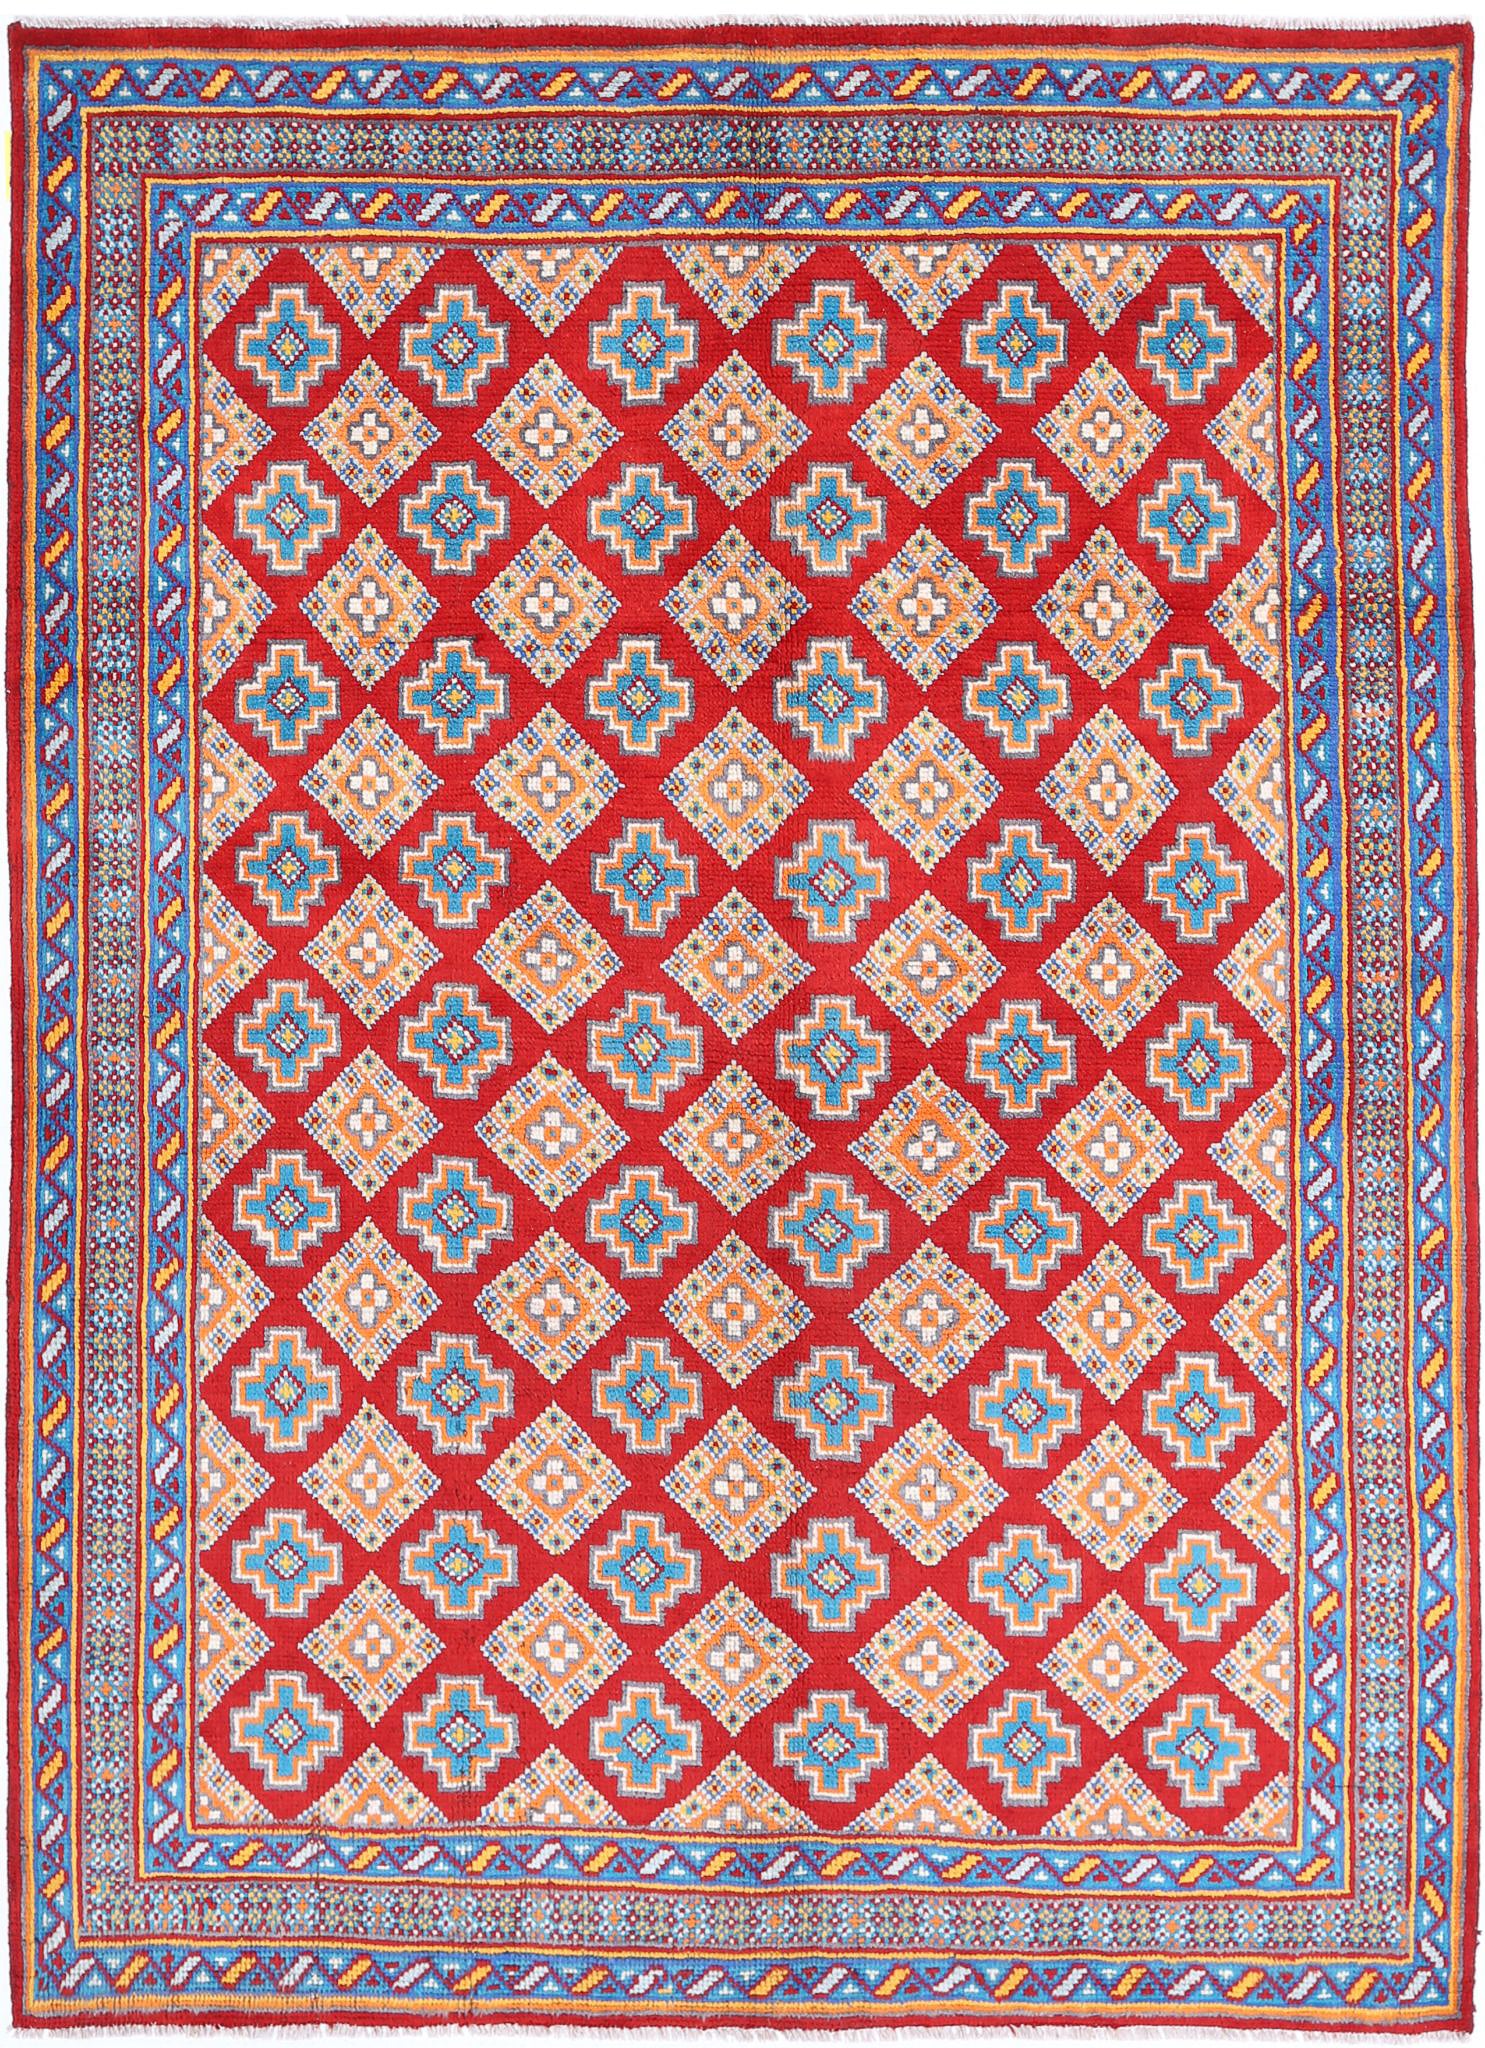 Revival-hand-knotted-qarghani-wool-rug-5013455.jpg